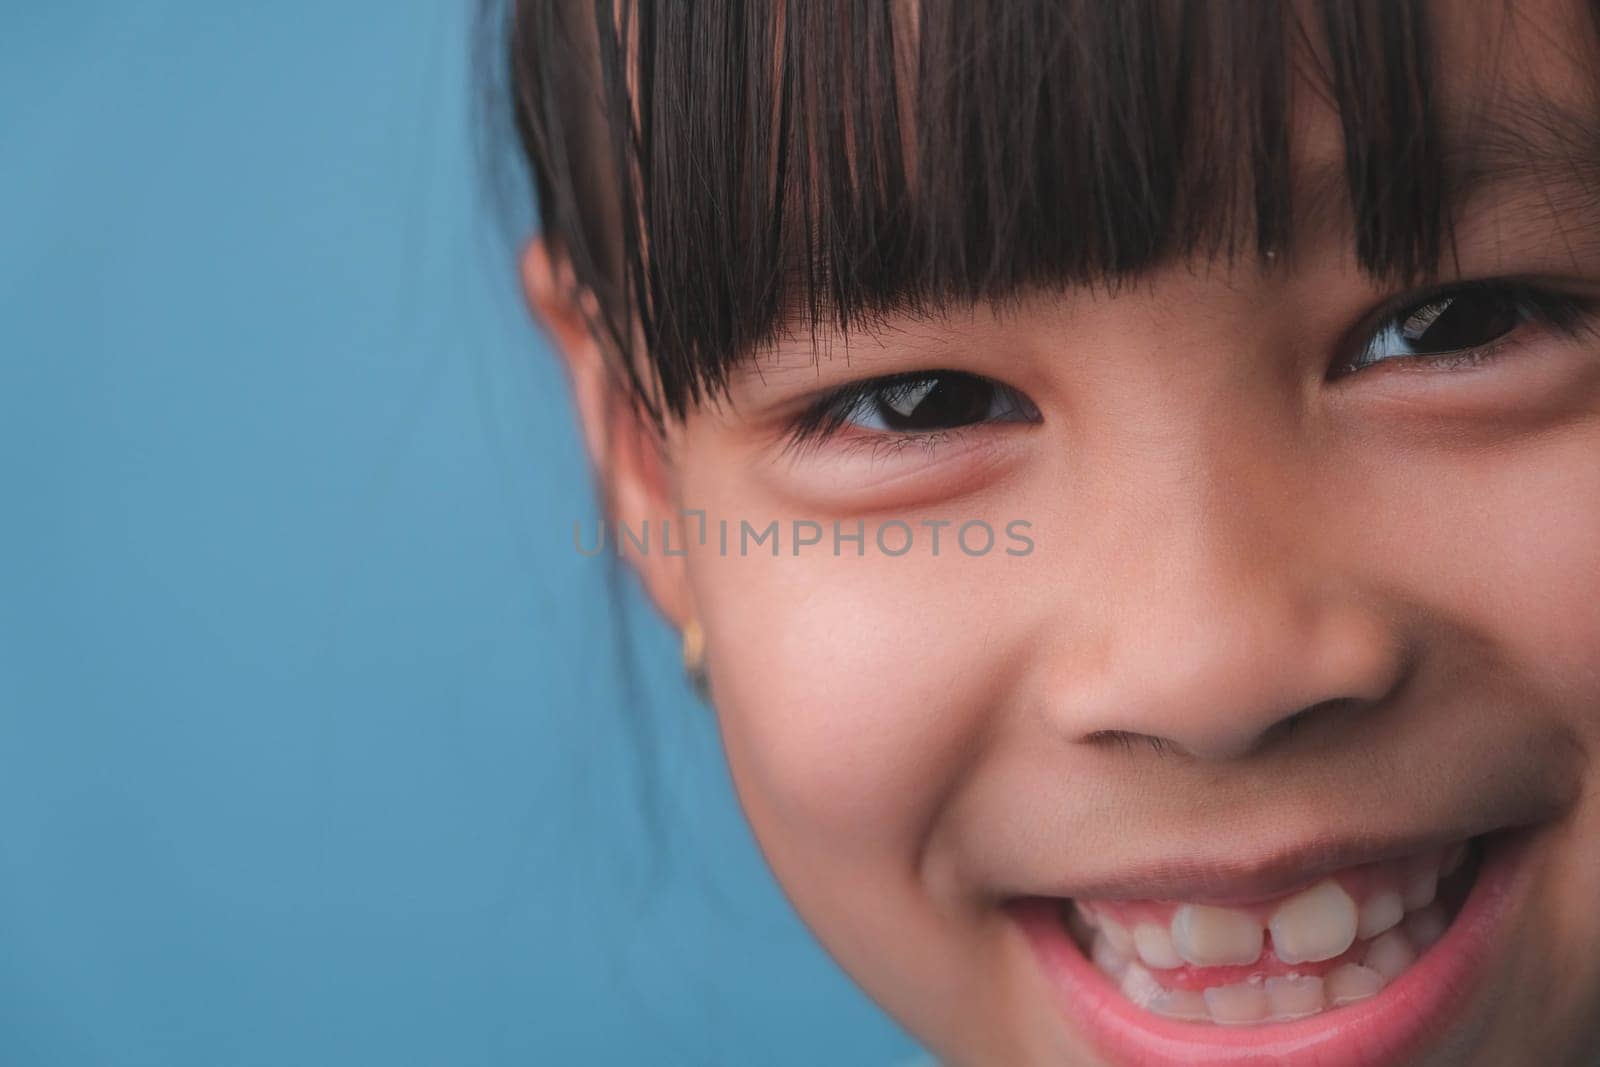 Portrait of a smiling little girl looking at the camera. Close up of cute Asian girl face posing on blue background.